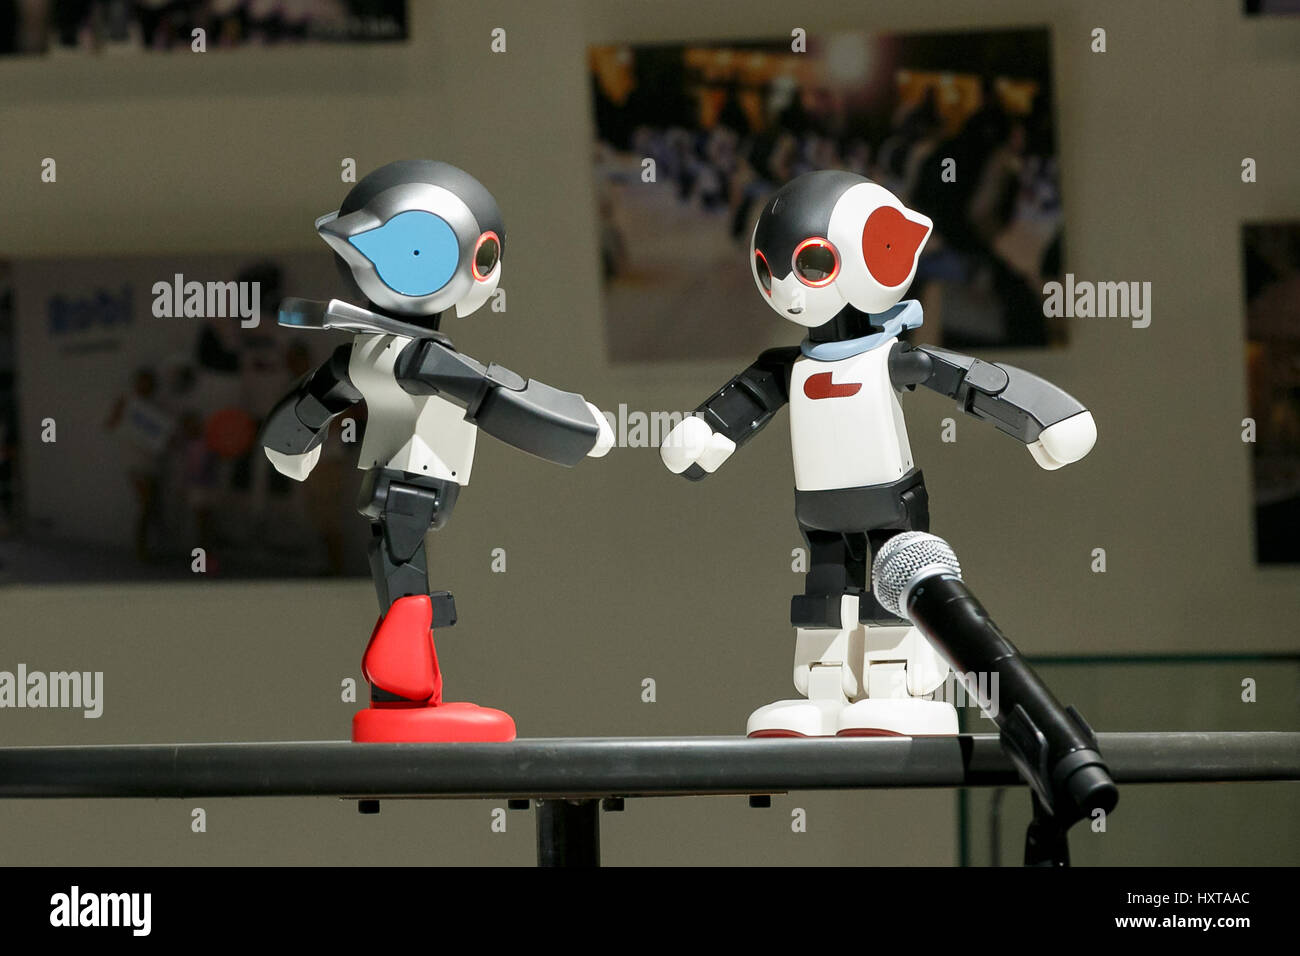 Tokyo, Japan. 30th March 2017. (L to R) Robots Robi 2 and Robi perform  during a media event for Robi EXPO in Roppongi Hills on March 30, 2017,  Tokyo, Japan. 48 Robi